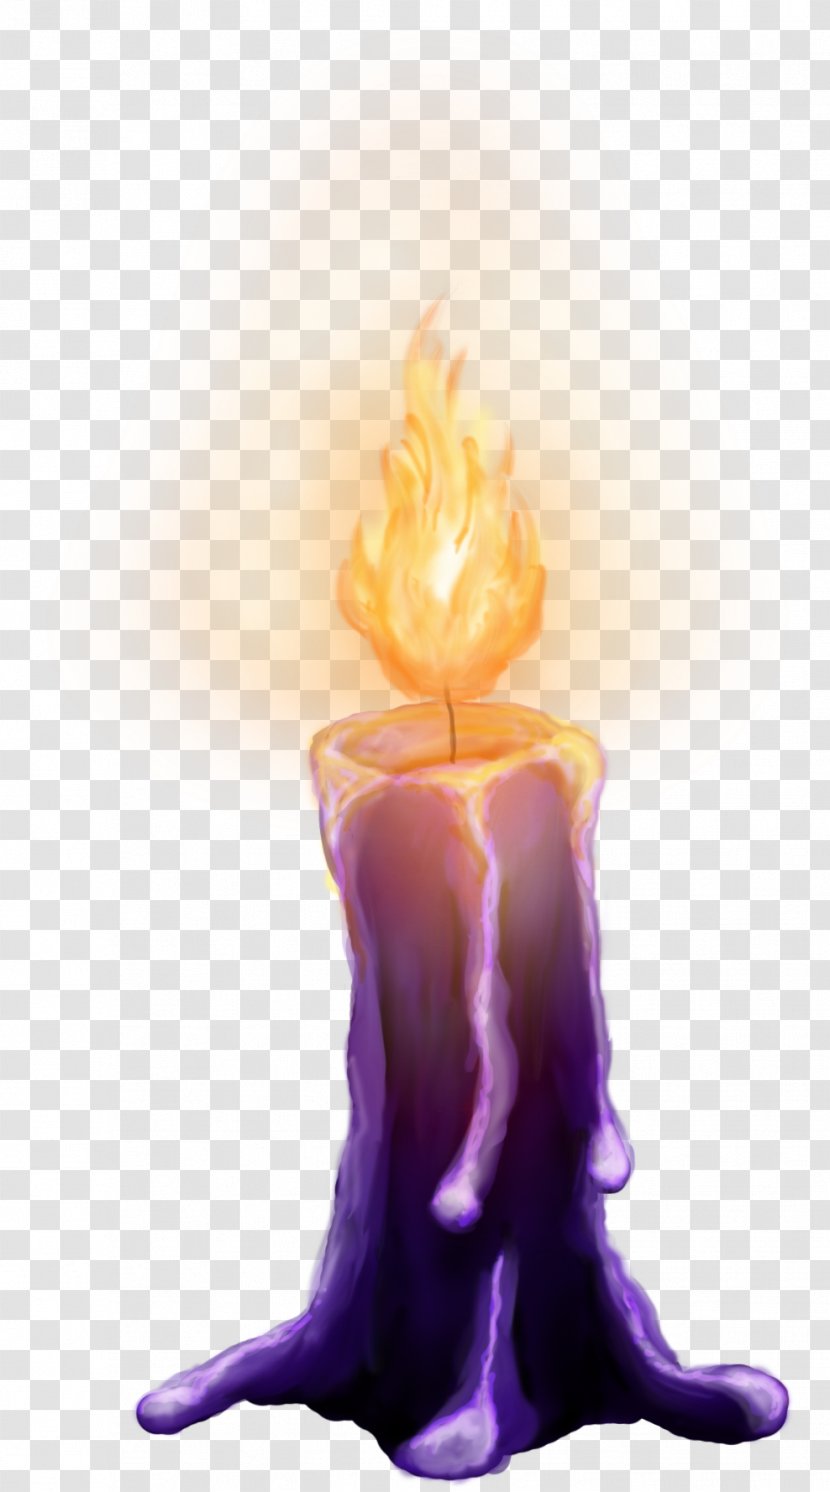 Candle Halloween Christmas Decoration Clip Art - Holiday - Burning Candles Transparent PNG